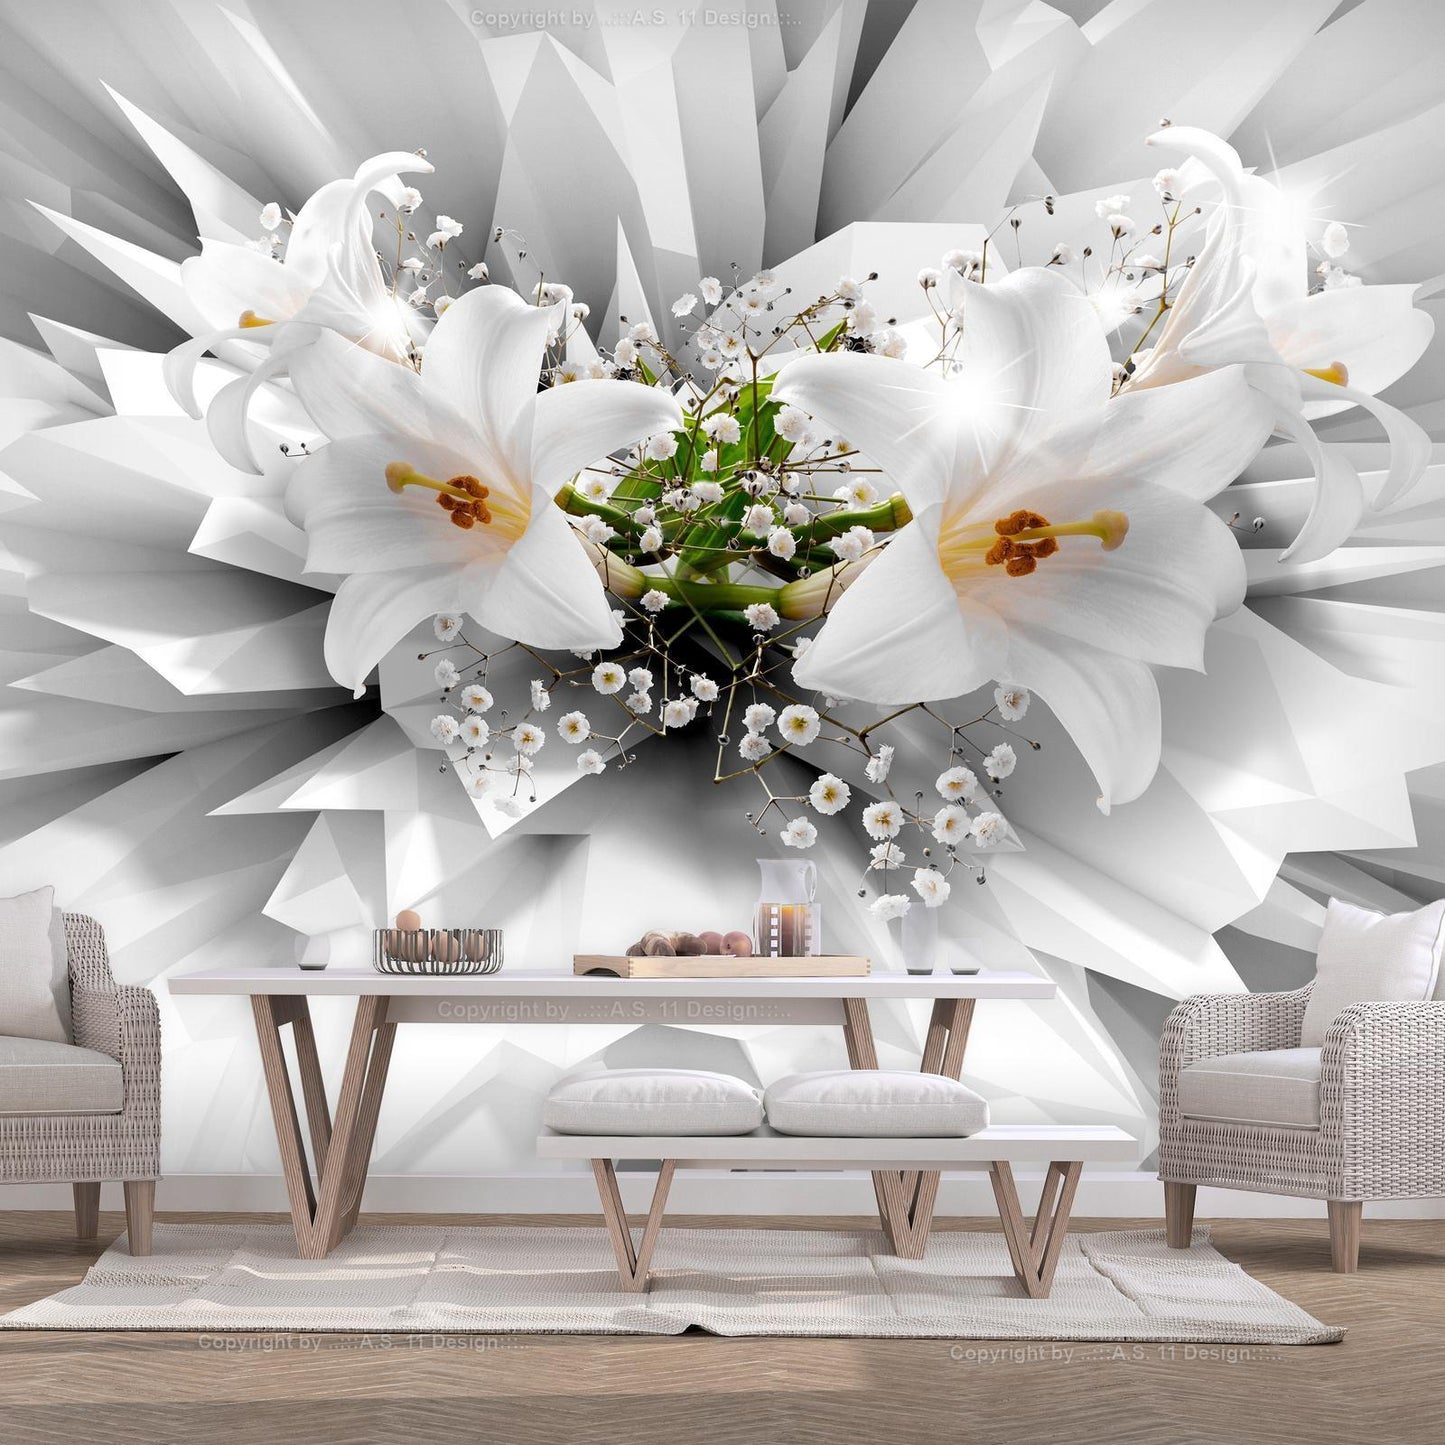 Self-adhesive photo wallpaper - Floral Explosion